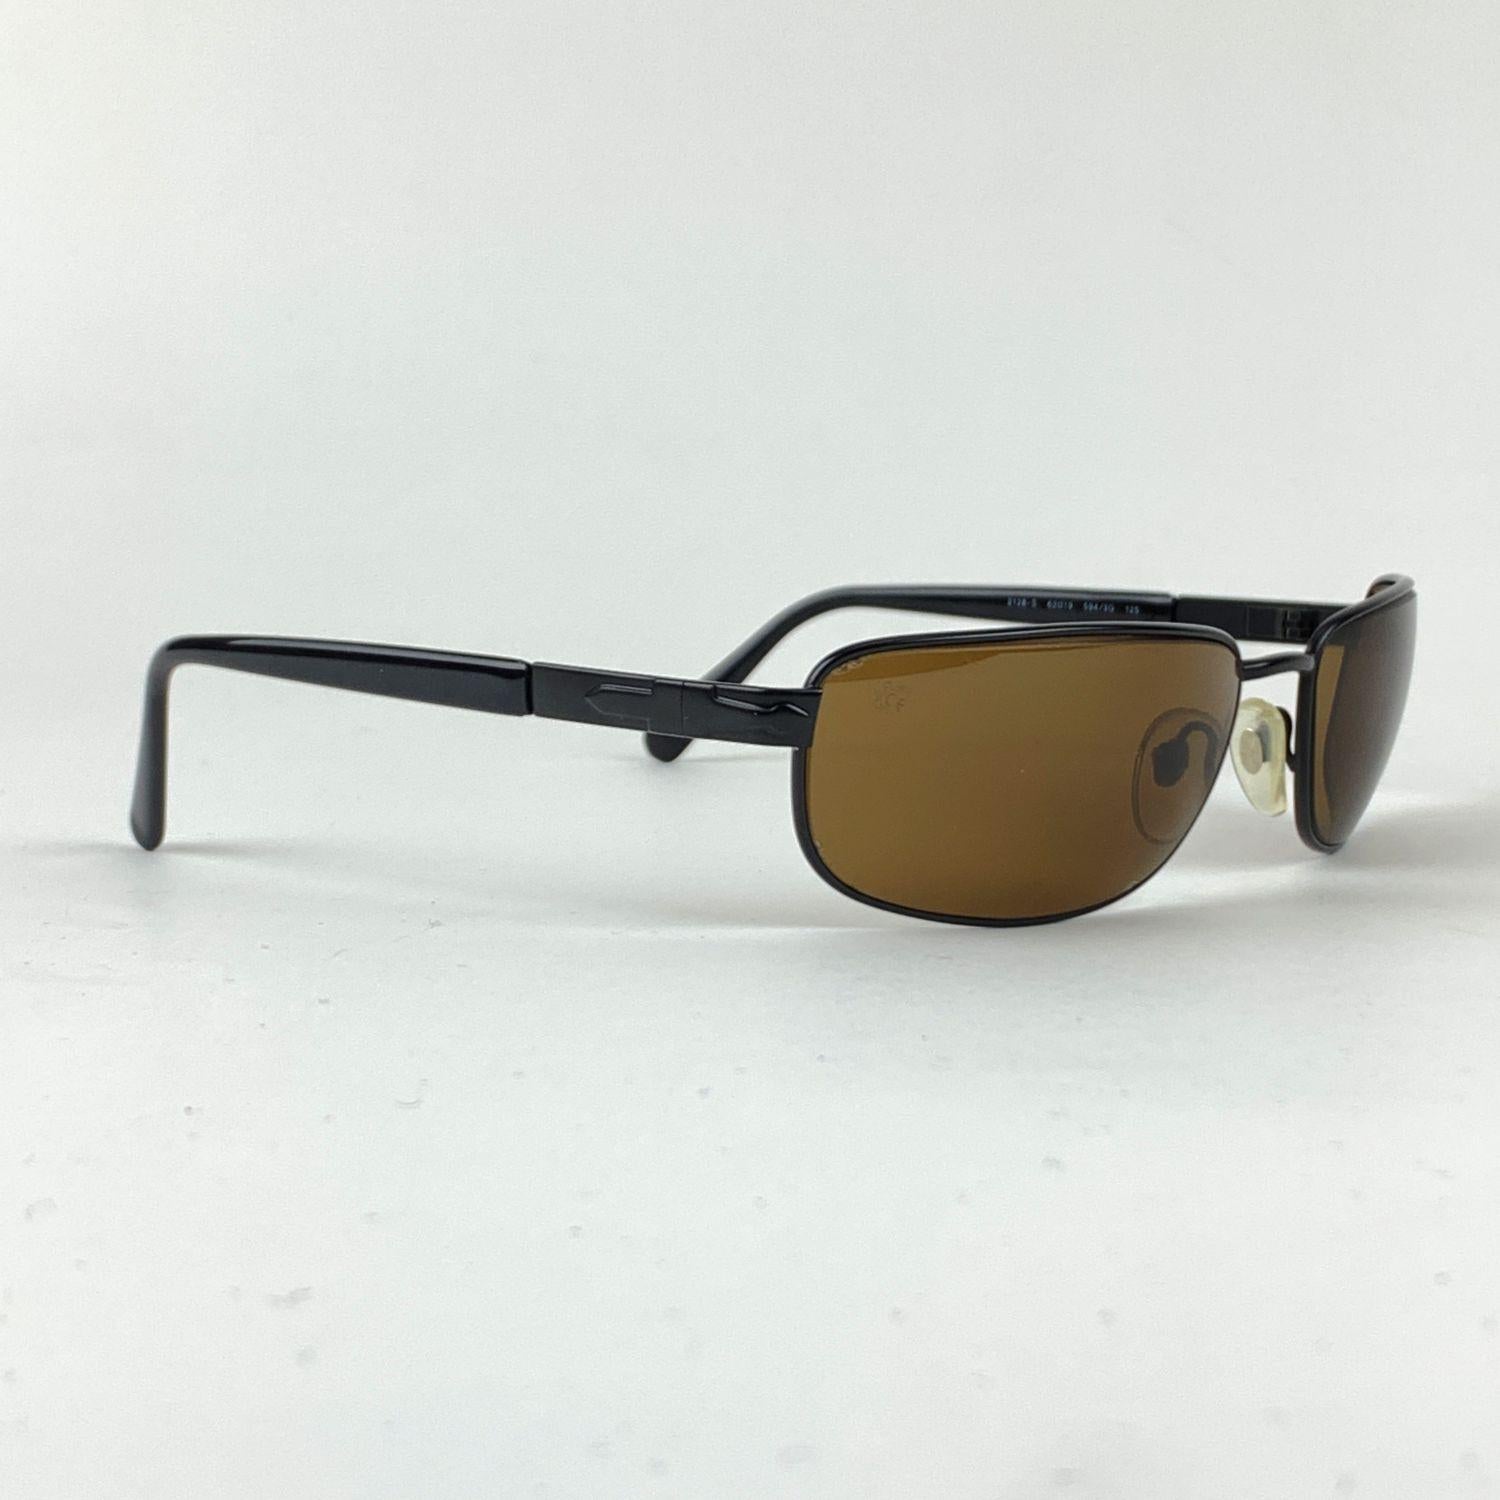 PERSOL sunglasses mod. 2128S. Rectangular handmade black metal sunglasses from early 90s by PERSOL. Flex hinges. Adjustable nose pads. Brown original lenses (PERSOL mark on lens). Made in Italy. Style & Refs: 2128-S - 62/19 - 125 -